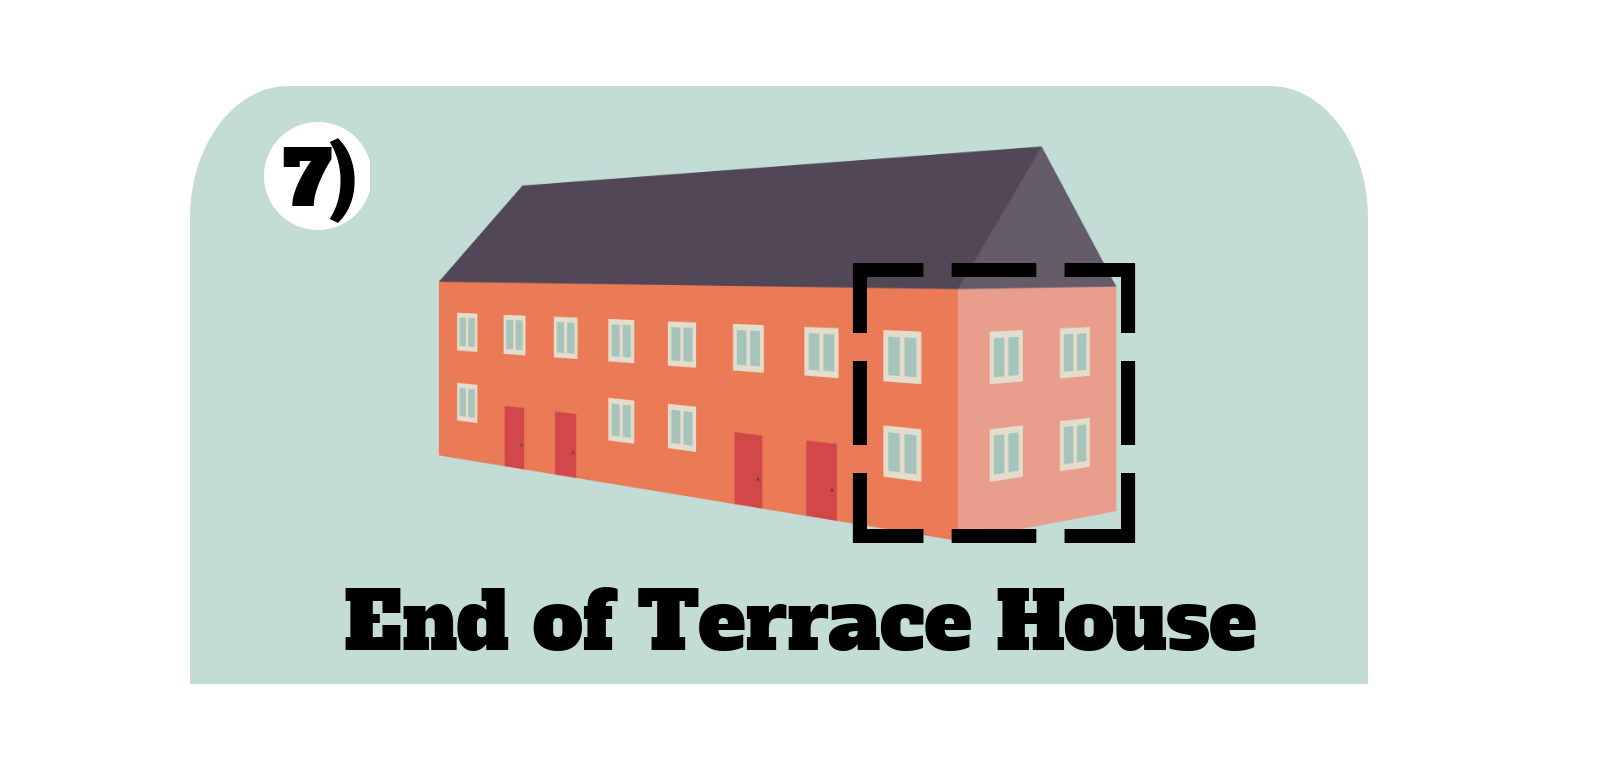 End of terrace property type